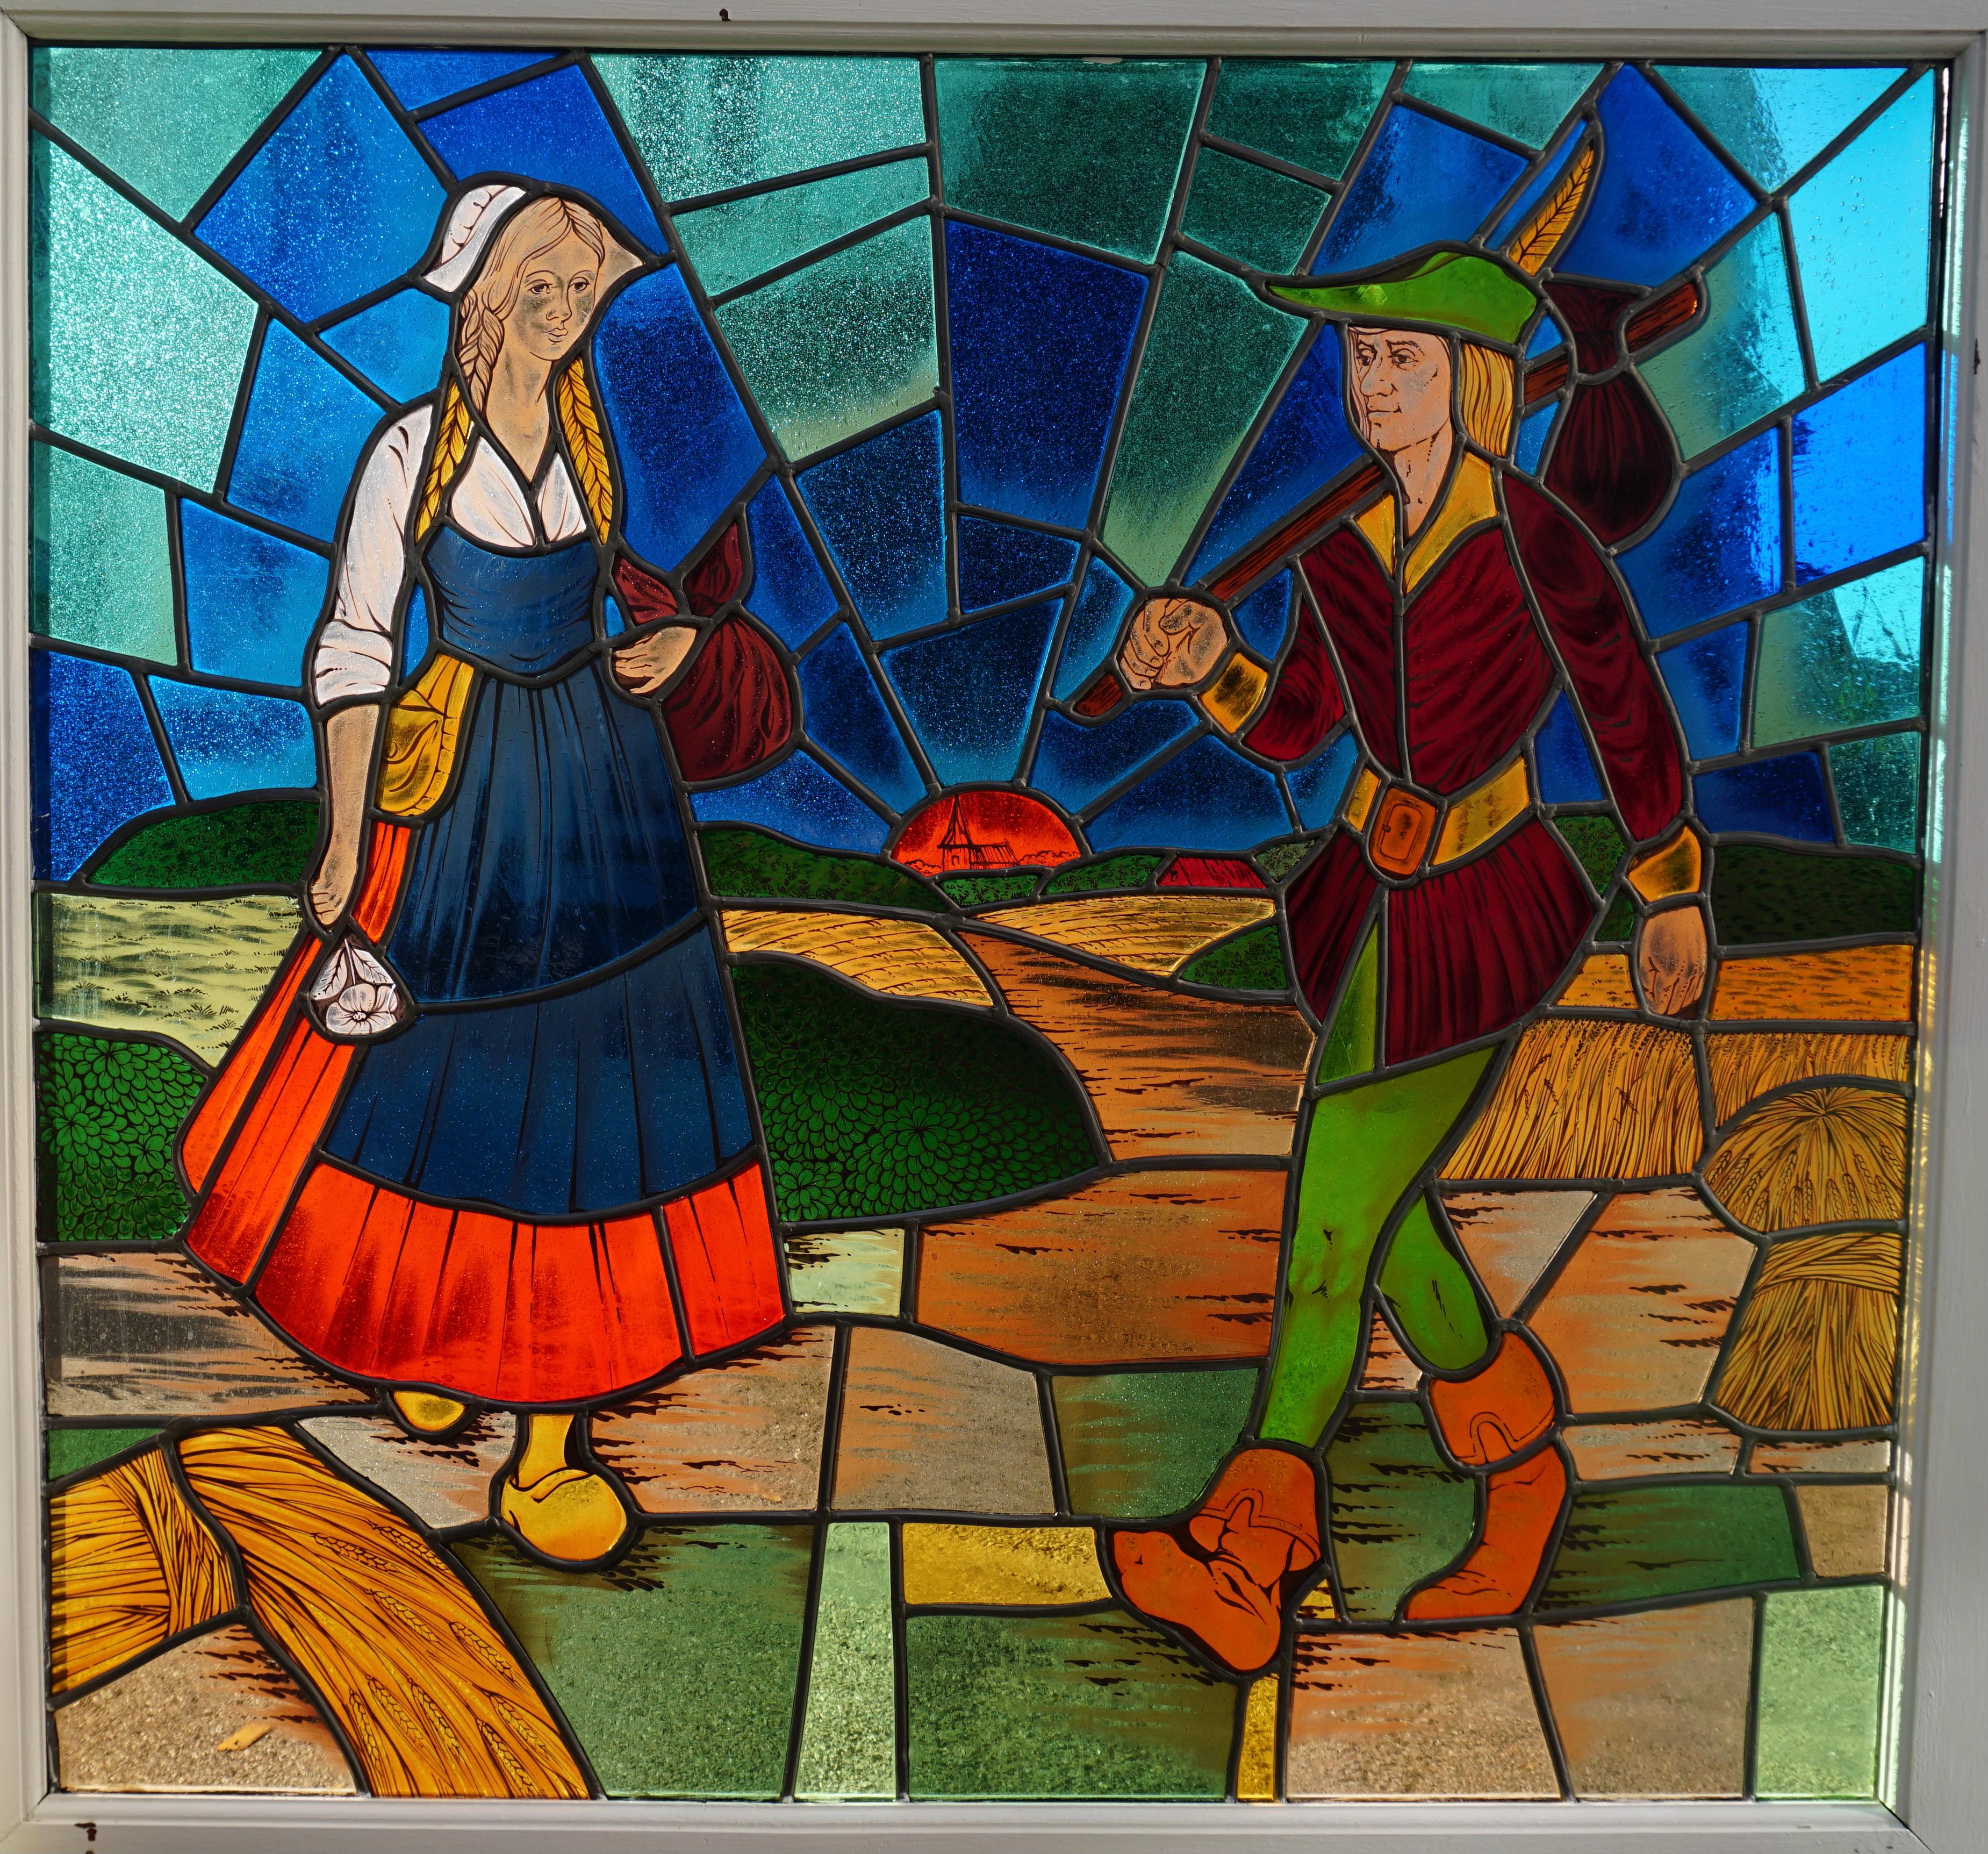 Stained glass work window - Tijl & Nele the legend and the heroic, cheerful and glorious deeds of Tijl Uilenspiegel (Tijl Owlmirror) and Lamme Goedzak in Flanders - 2nd half of the 20th century

This is a pretty and very colorful stained glass